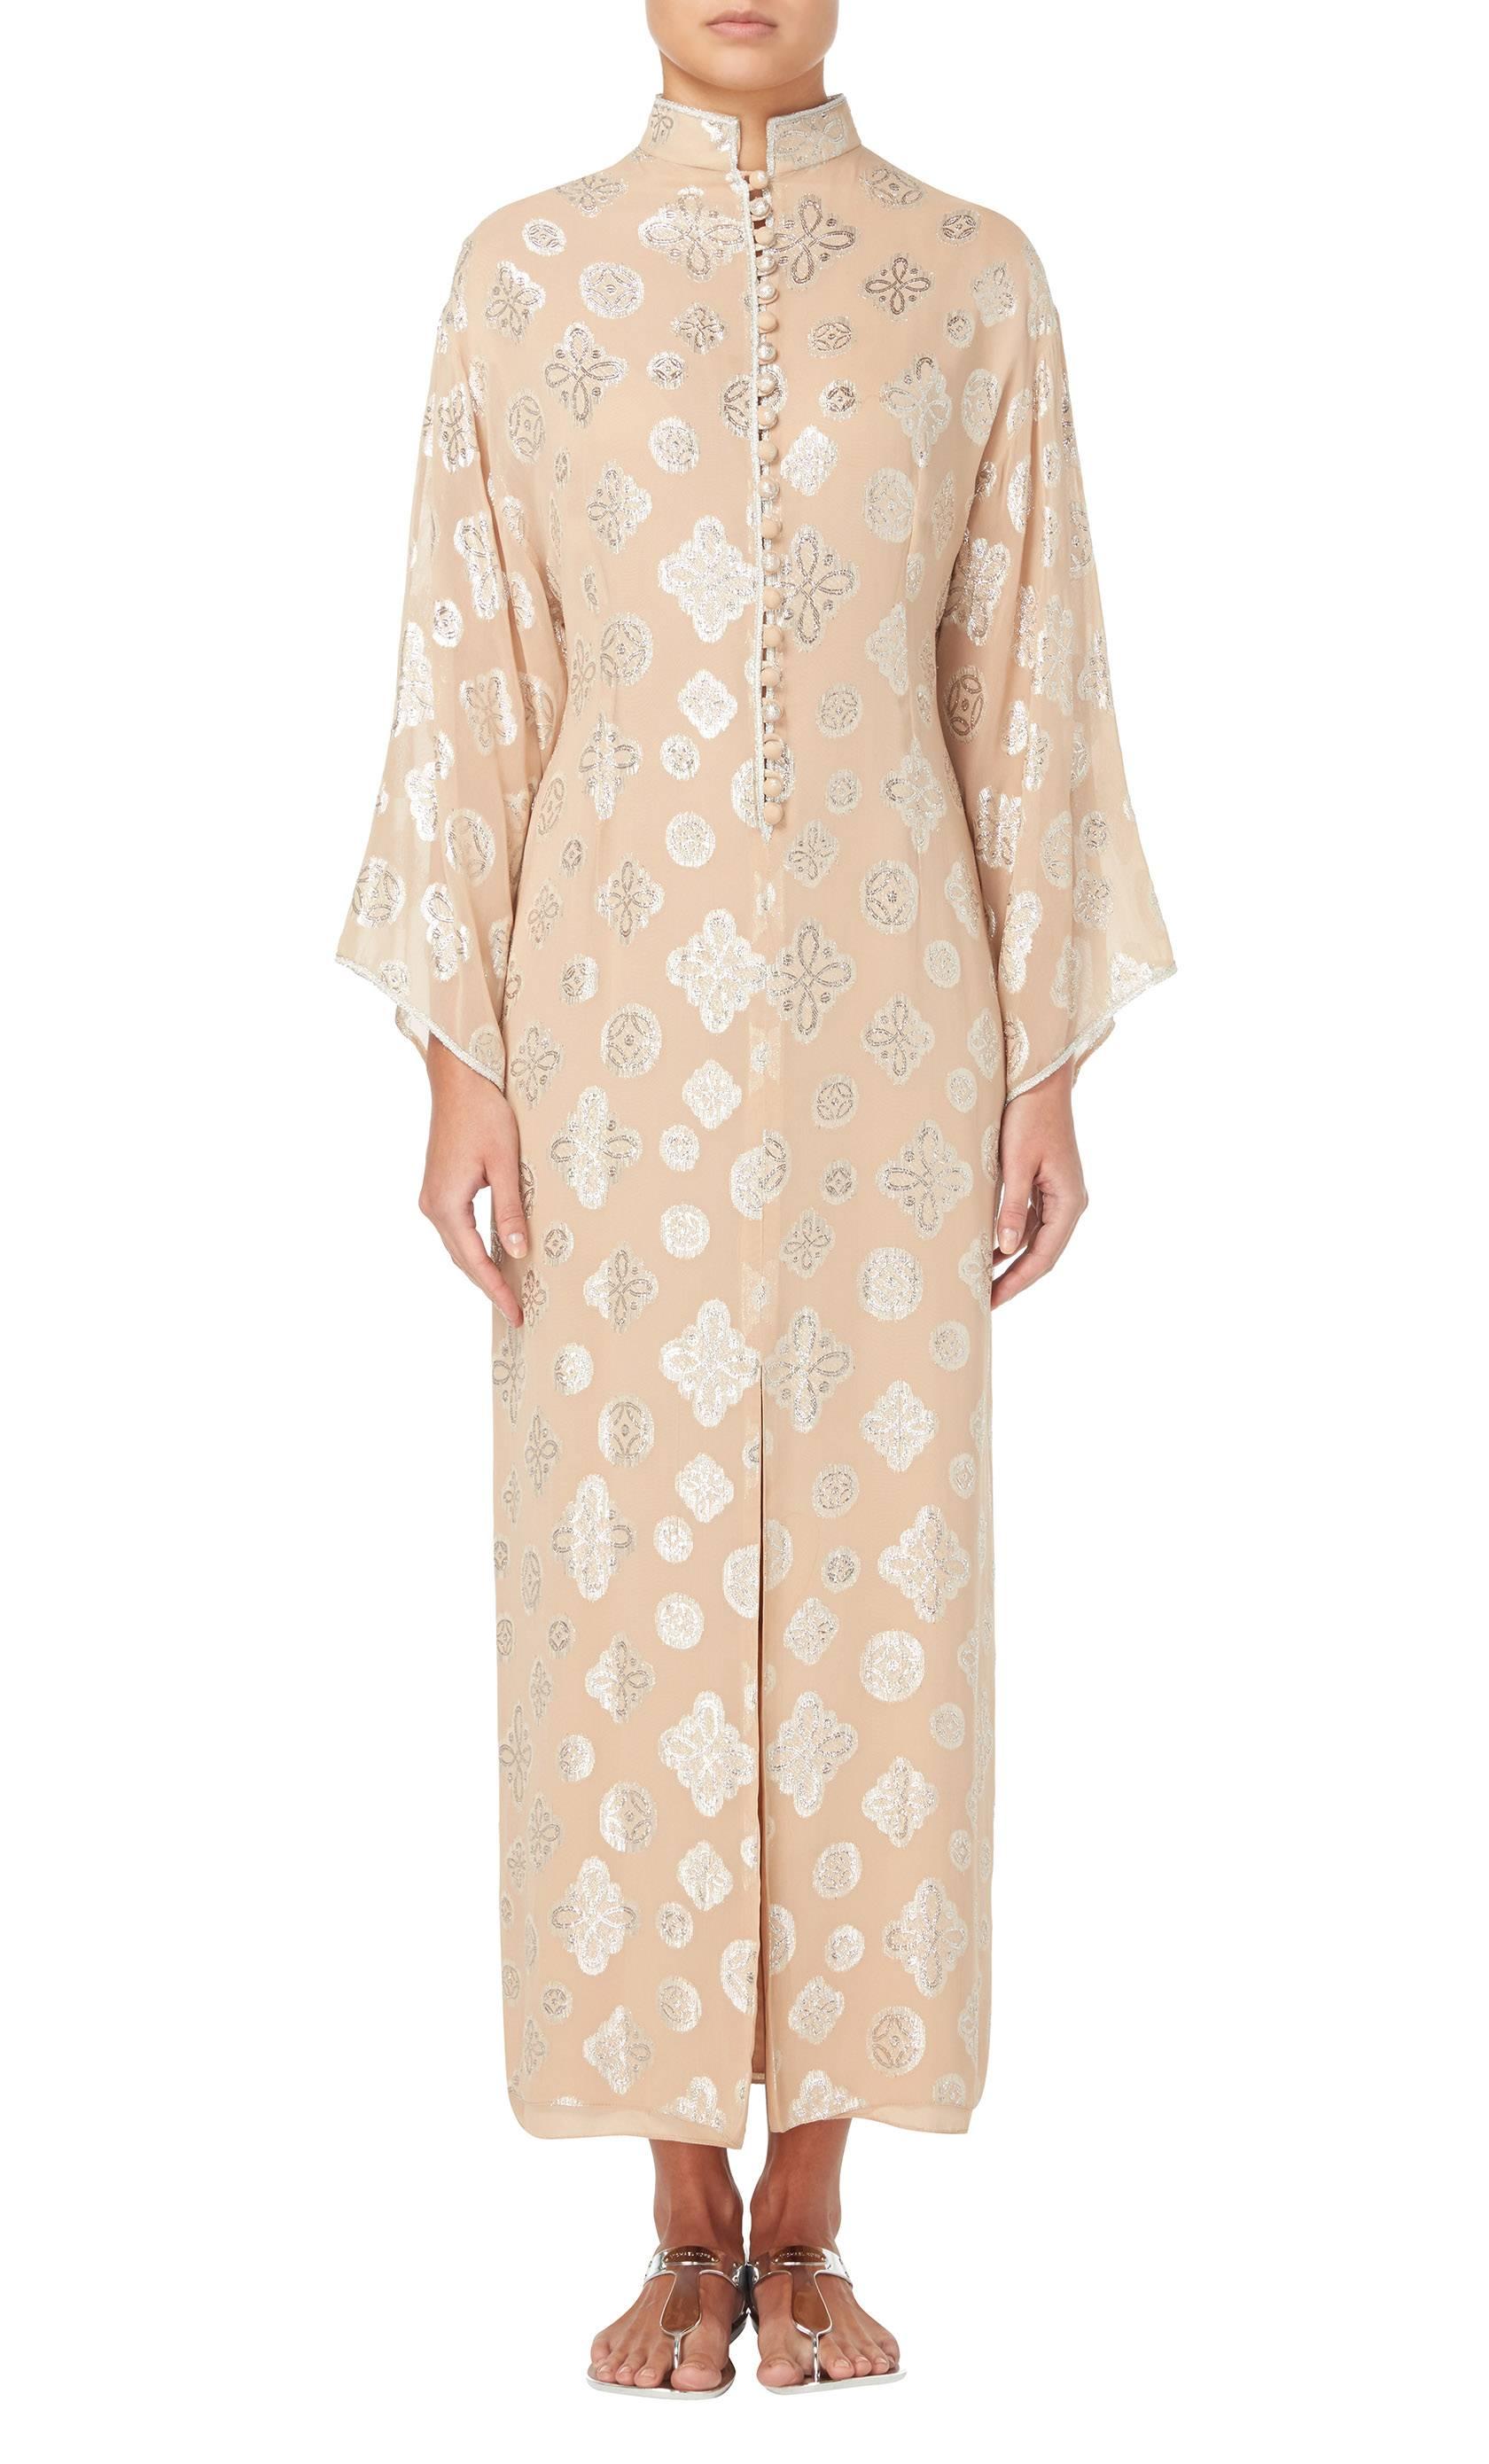 This Oscar de la Renta dress has a relaxed, bohemian feel, perfect for holidays and hot summer nights. Constructed in apricot synthetic chiffon with a silver Lurex paisley pattern, the dress features a high neckline and twenty fabric covered buttons